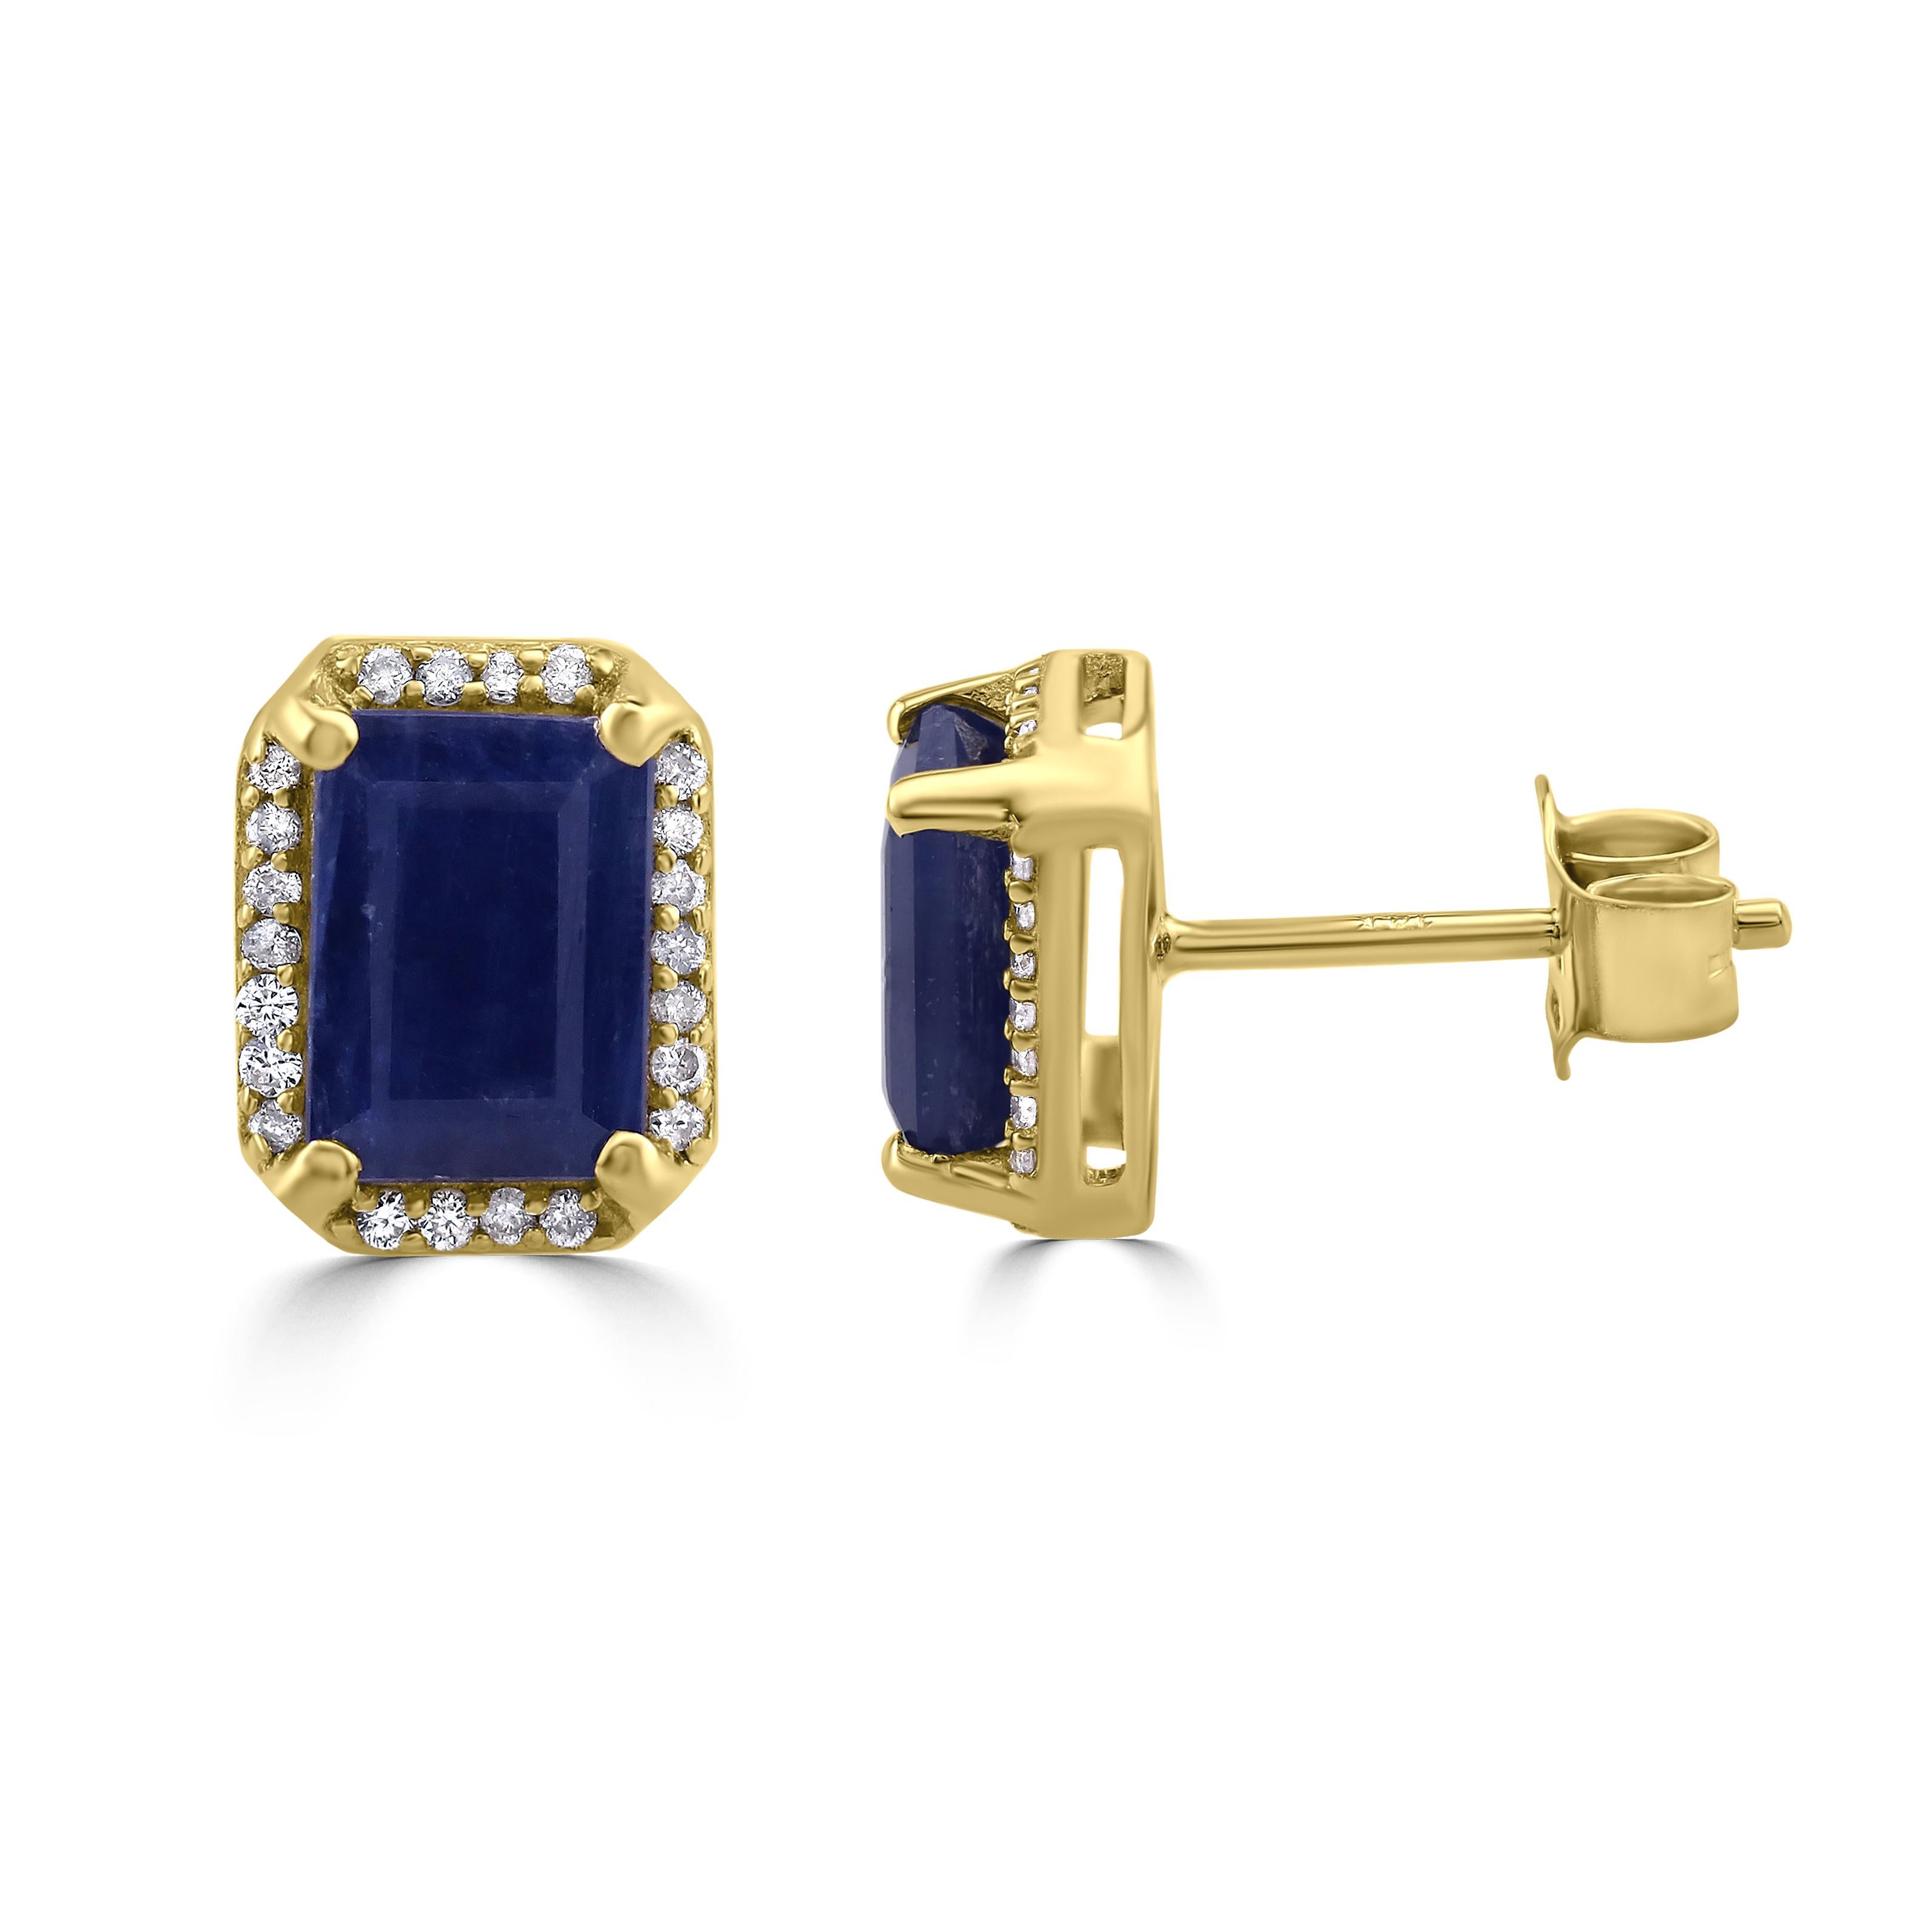 Contemporary Gemistry 2.9 Carat Octagon Blue Sapphire Stud Earrings with Diamond in 14K Gold For Sale